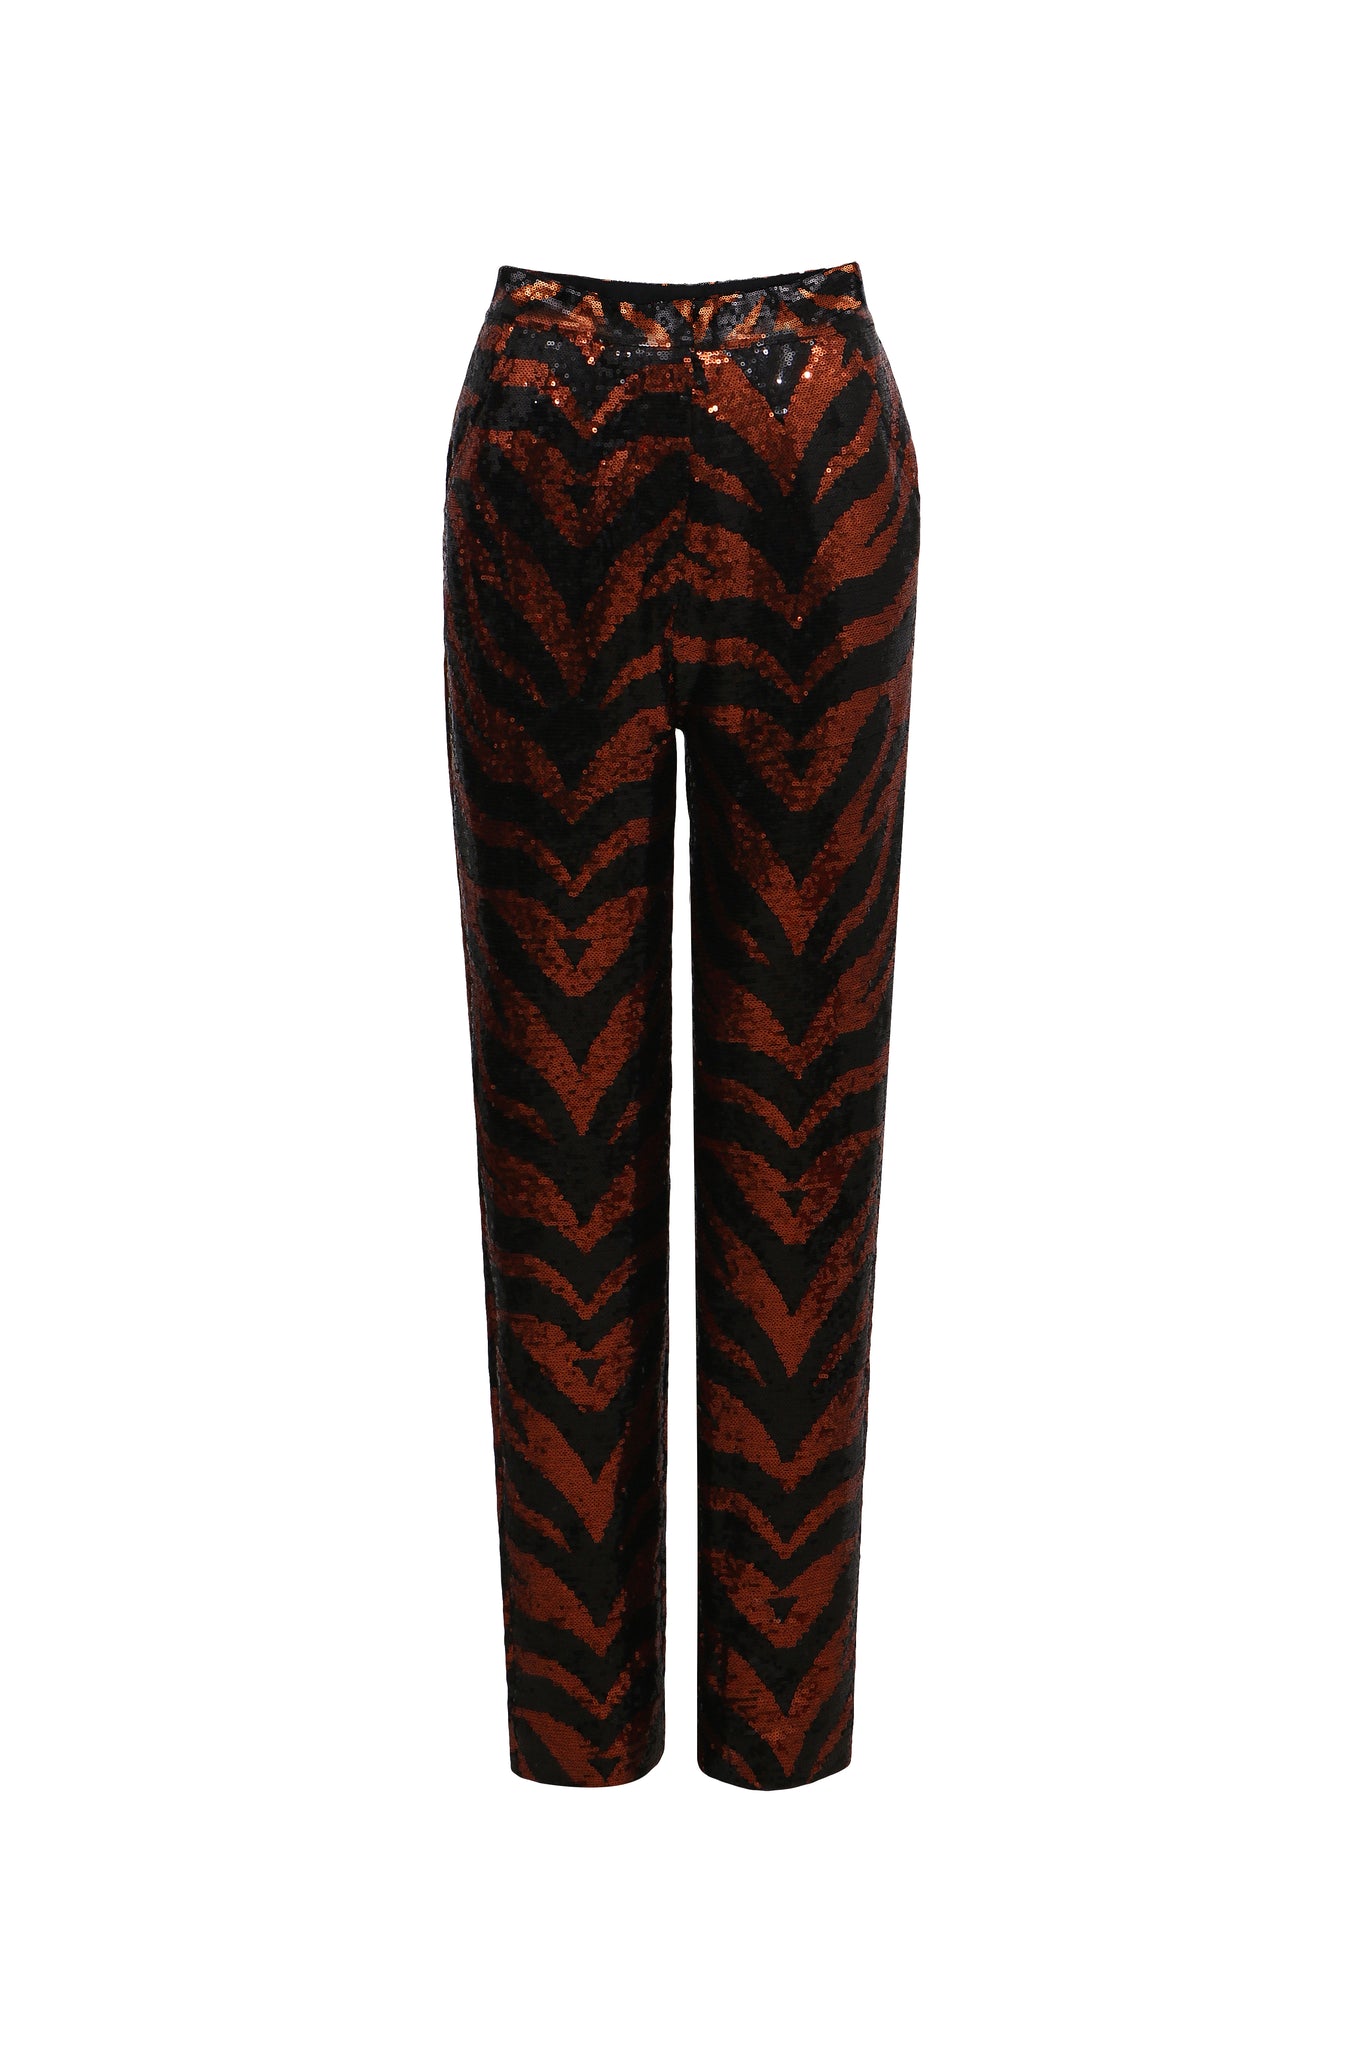 Stacy Sequin Pant- Pink Leopard Print